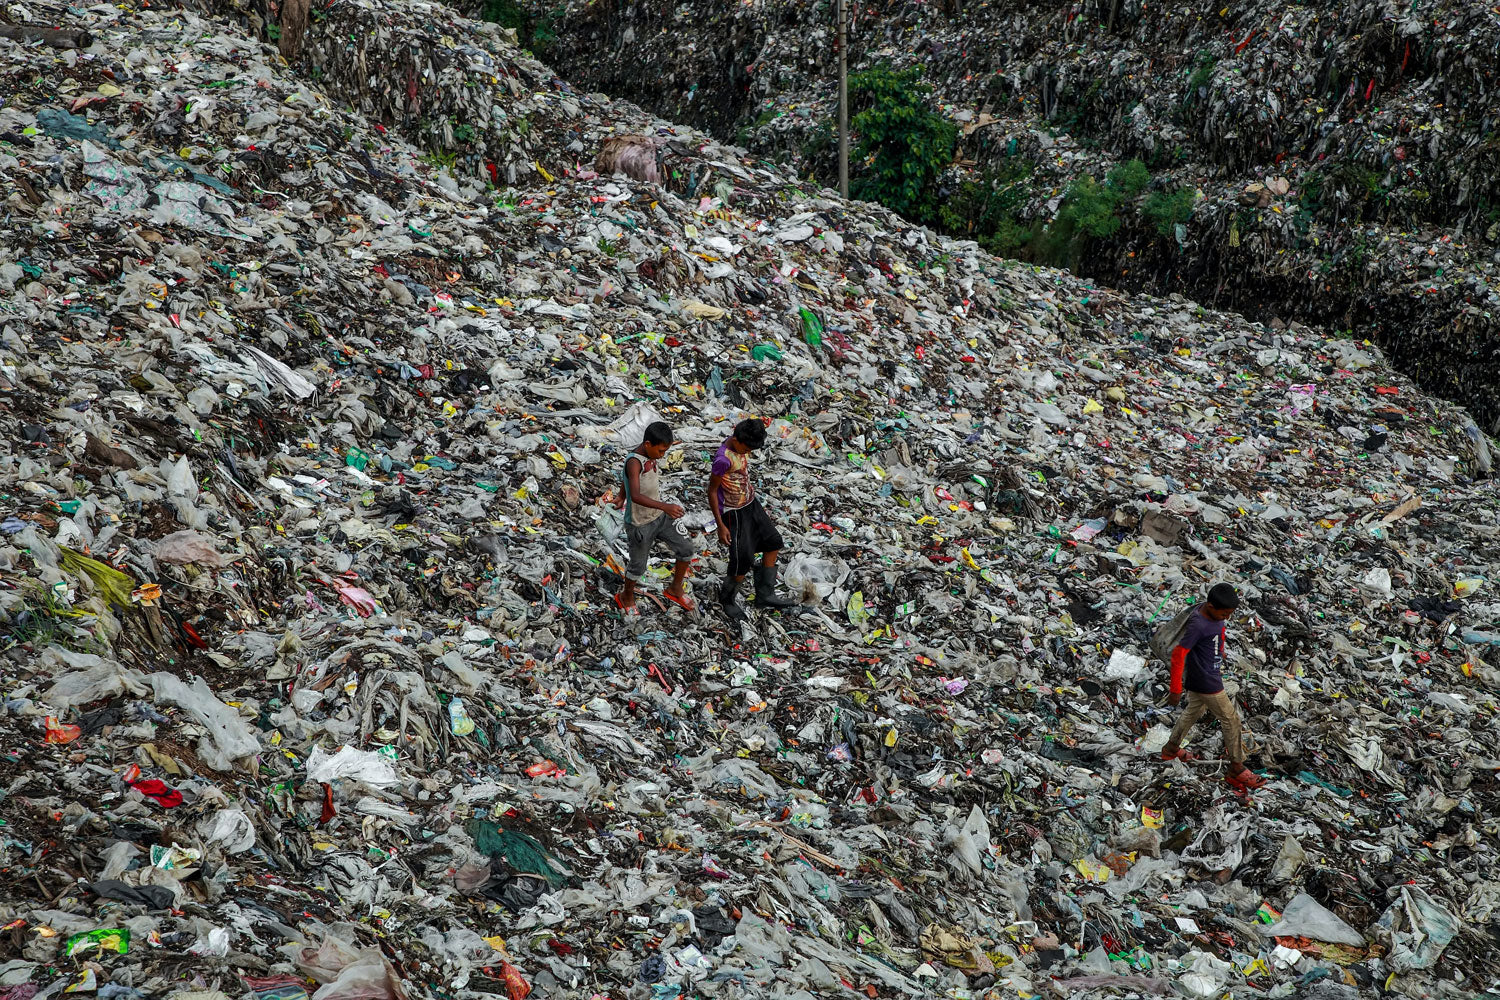 Landfill site with too much waste, from plastic to food to general litter. Three people are walking over the landfill waste pile.